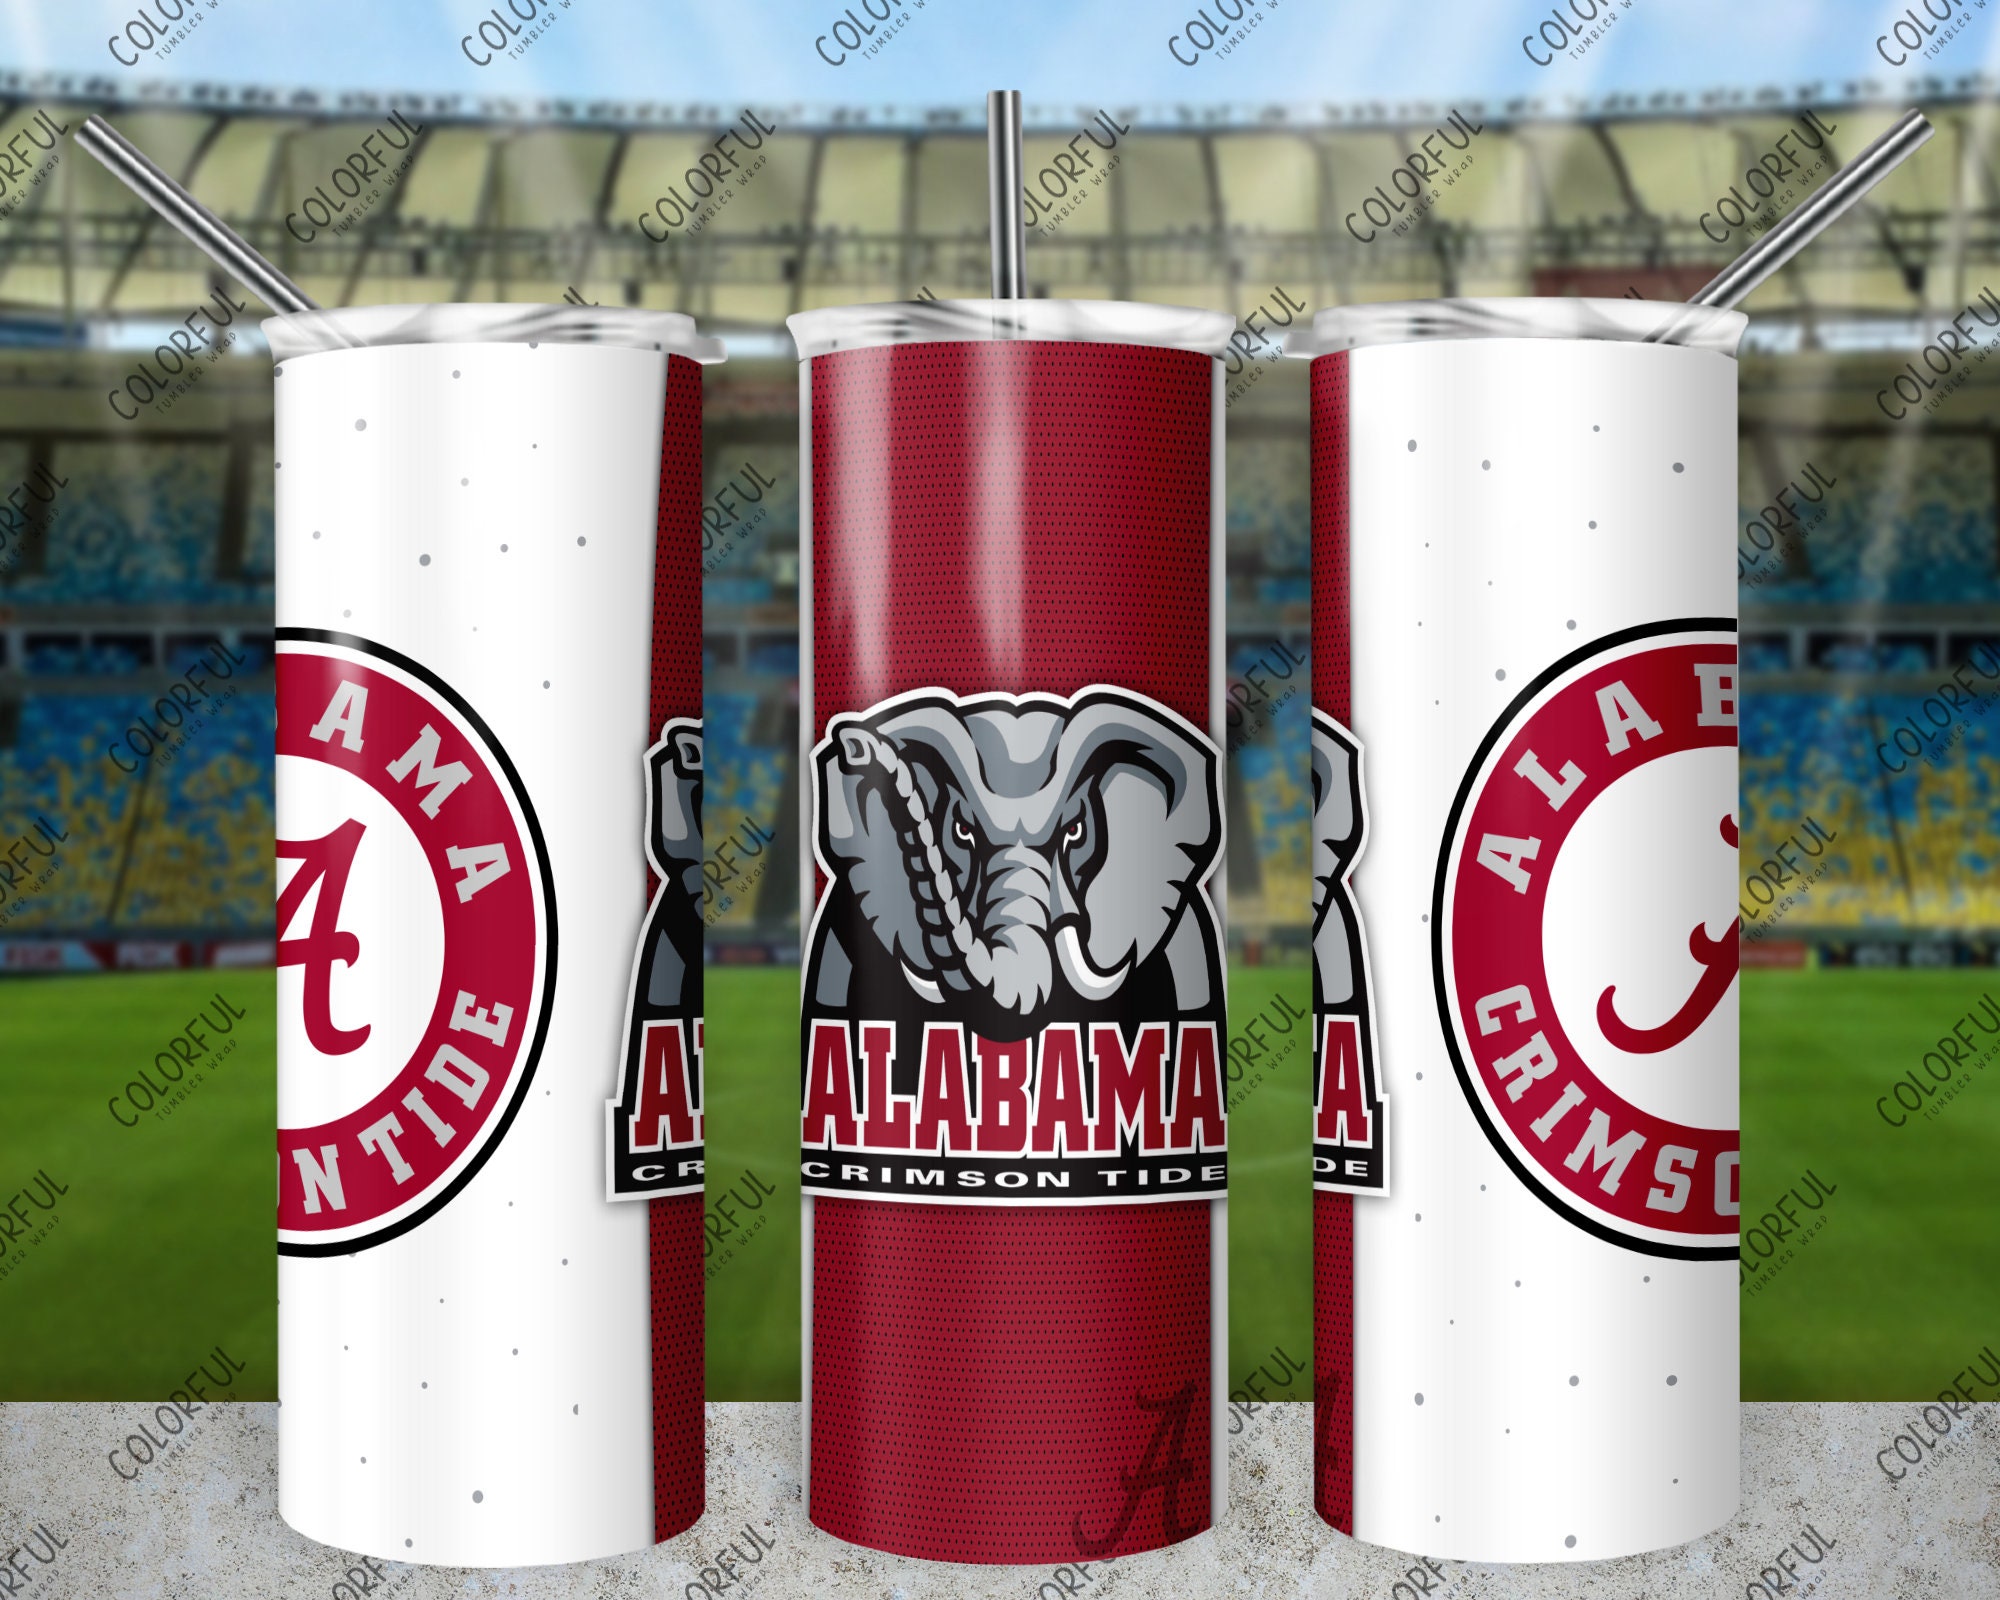 Alabama Crimson Tide Steel Water Bottle with leather Football wrap 26 oz  NEW